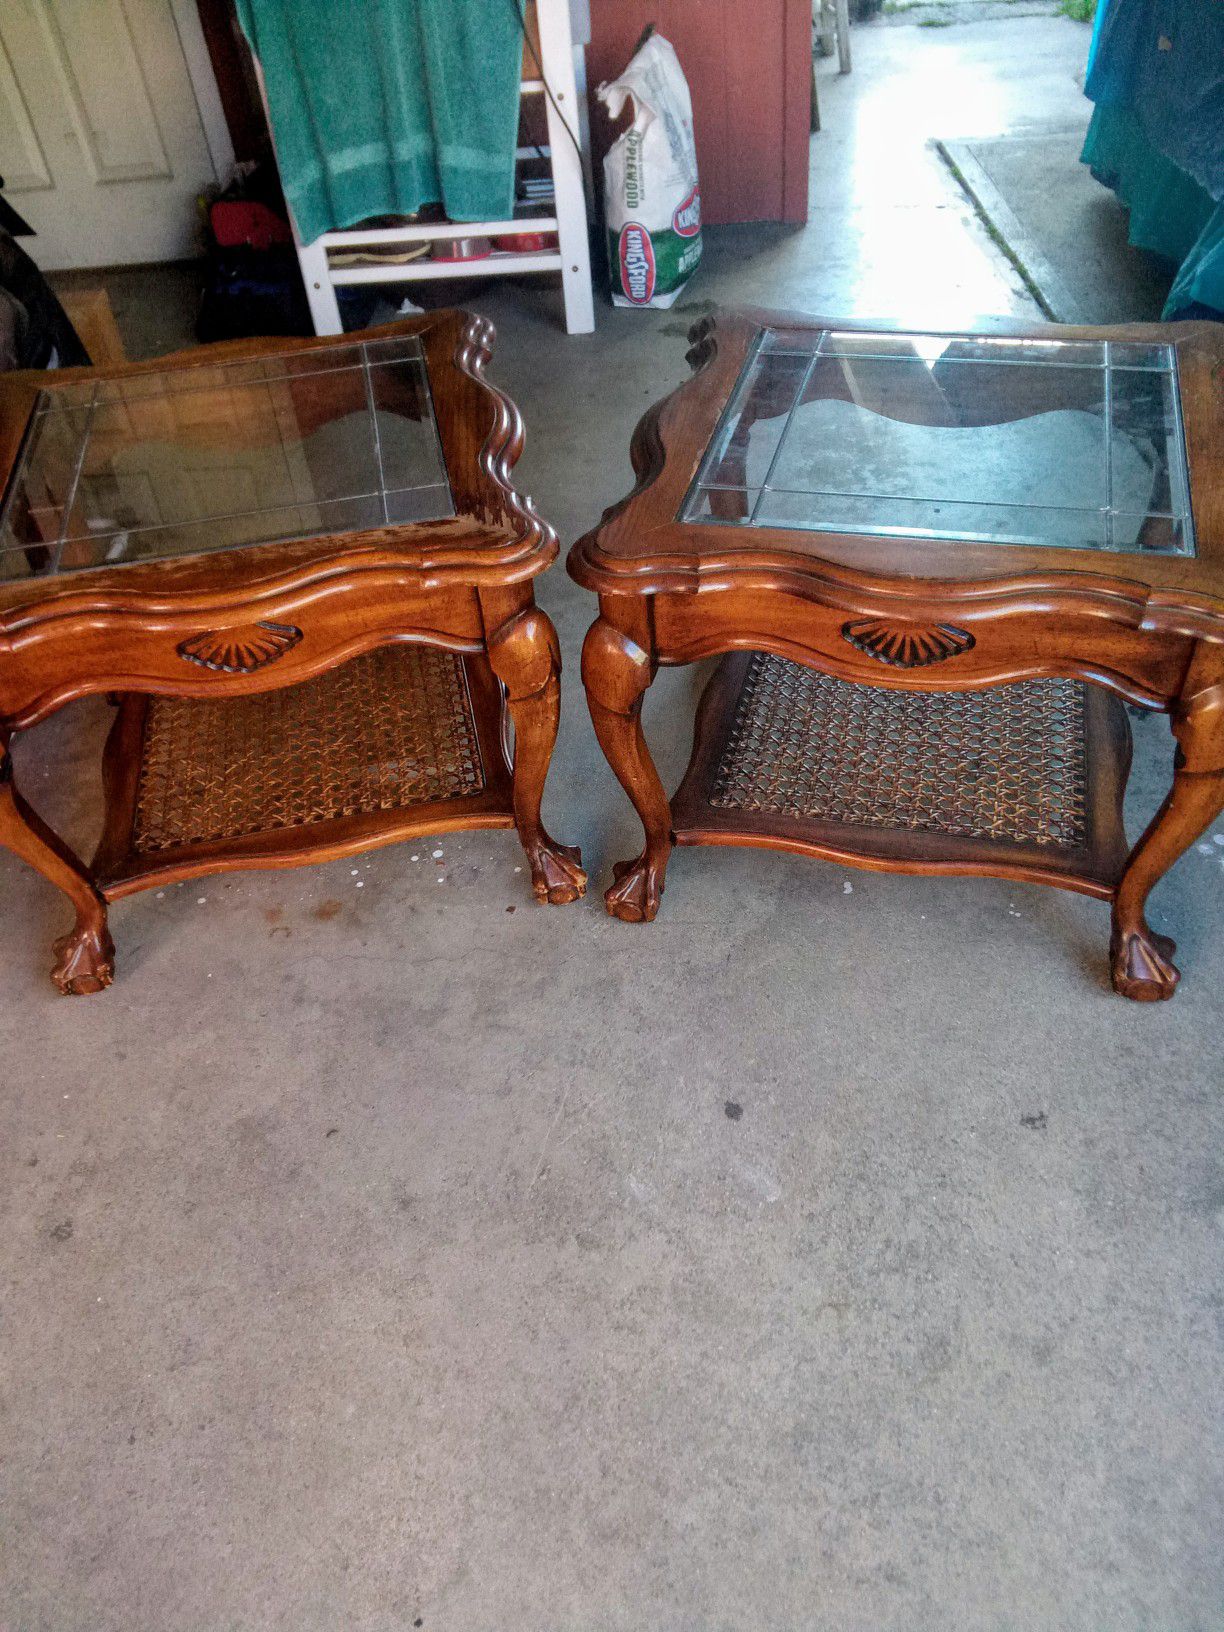 2 Antique Wood Glass side tables